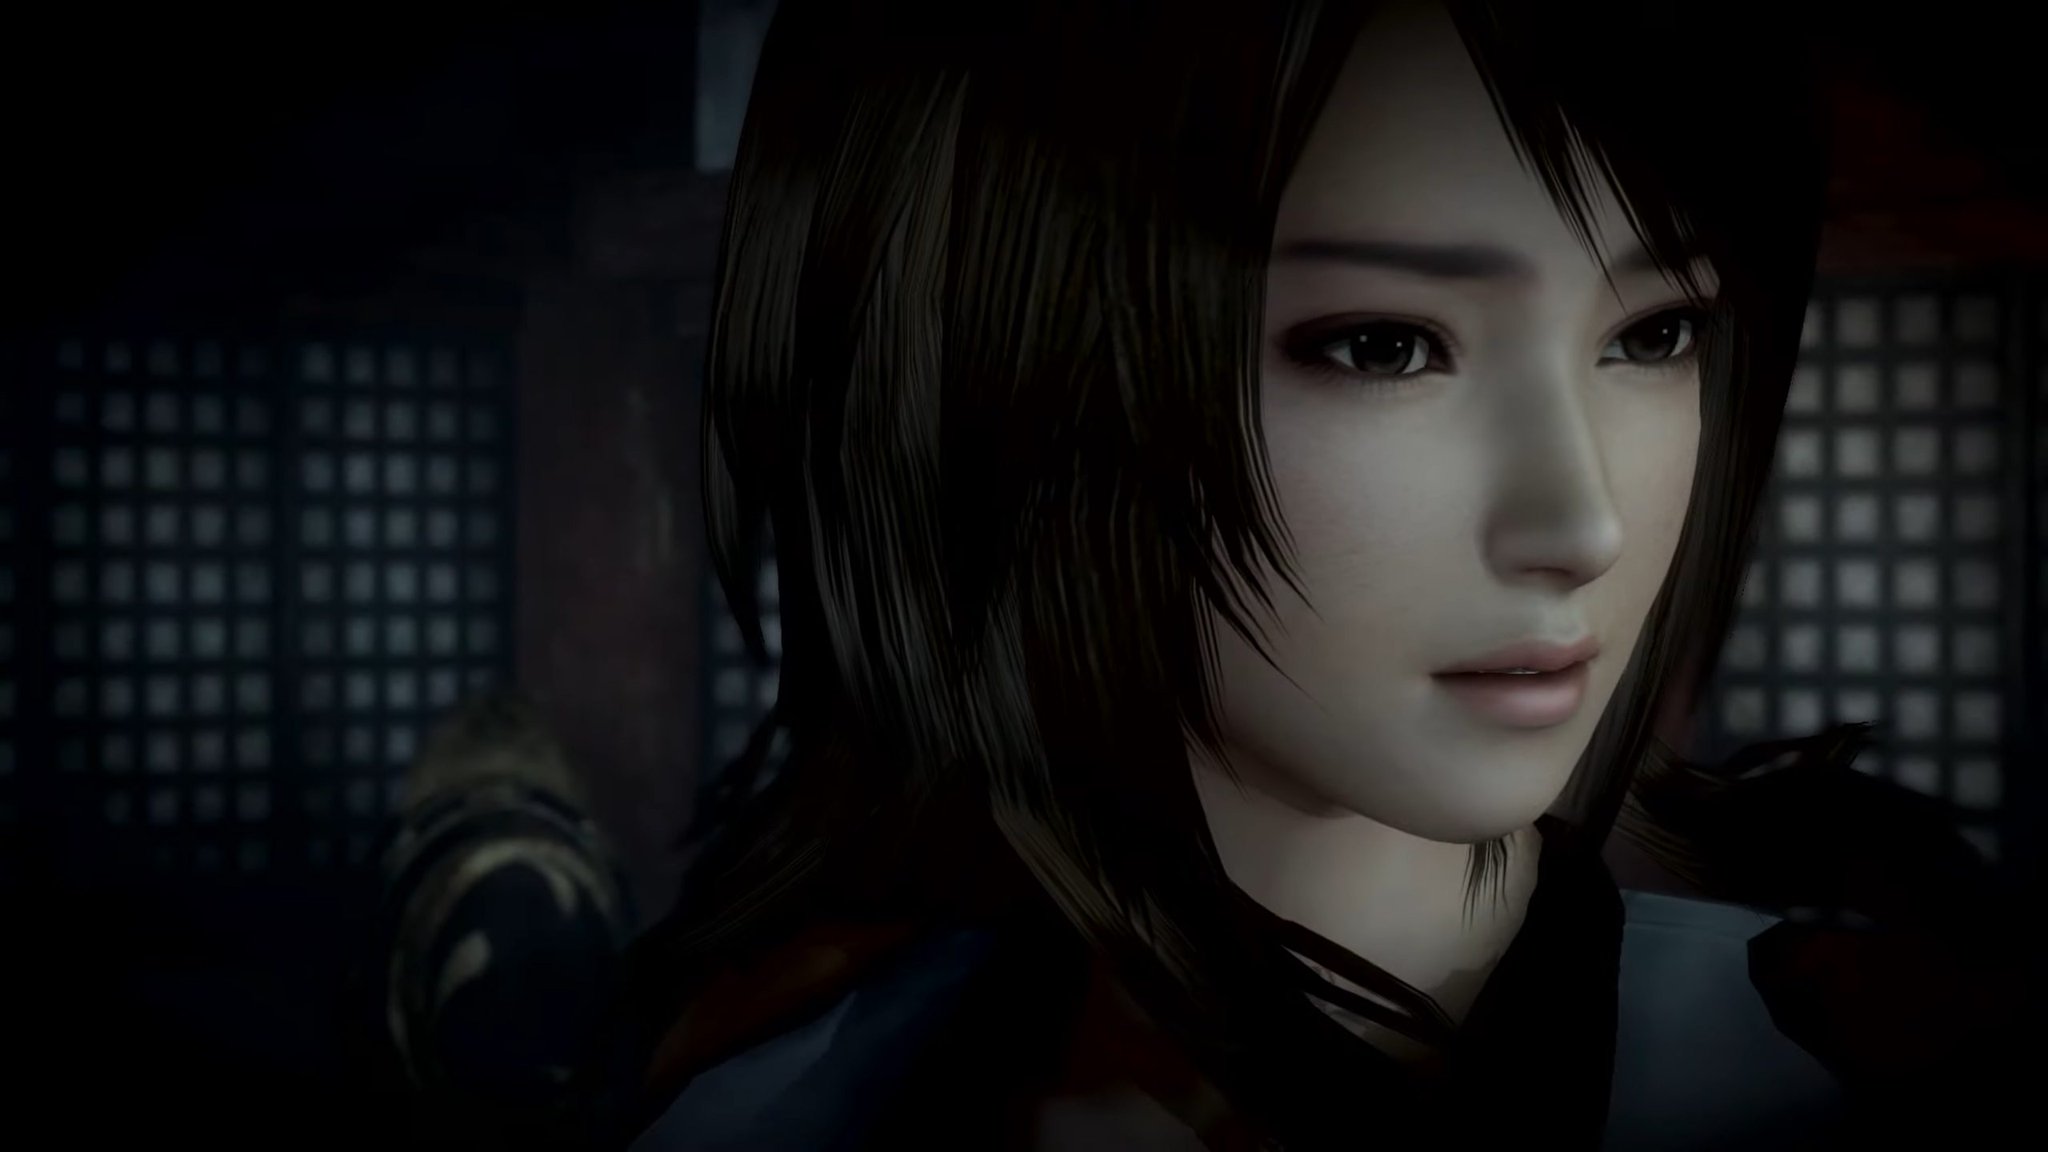 Fatal Frame Maiden of Black Water Comes to PC, Xbox One, Xbox Series X|S, Switch, PS4 and PS5 in 2021